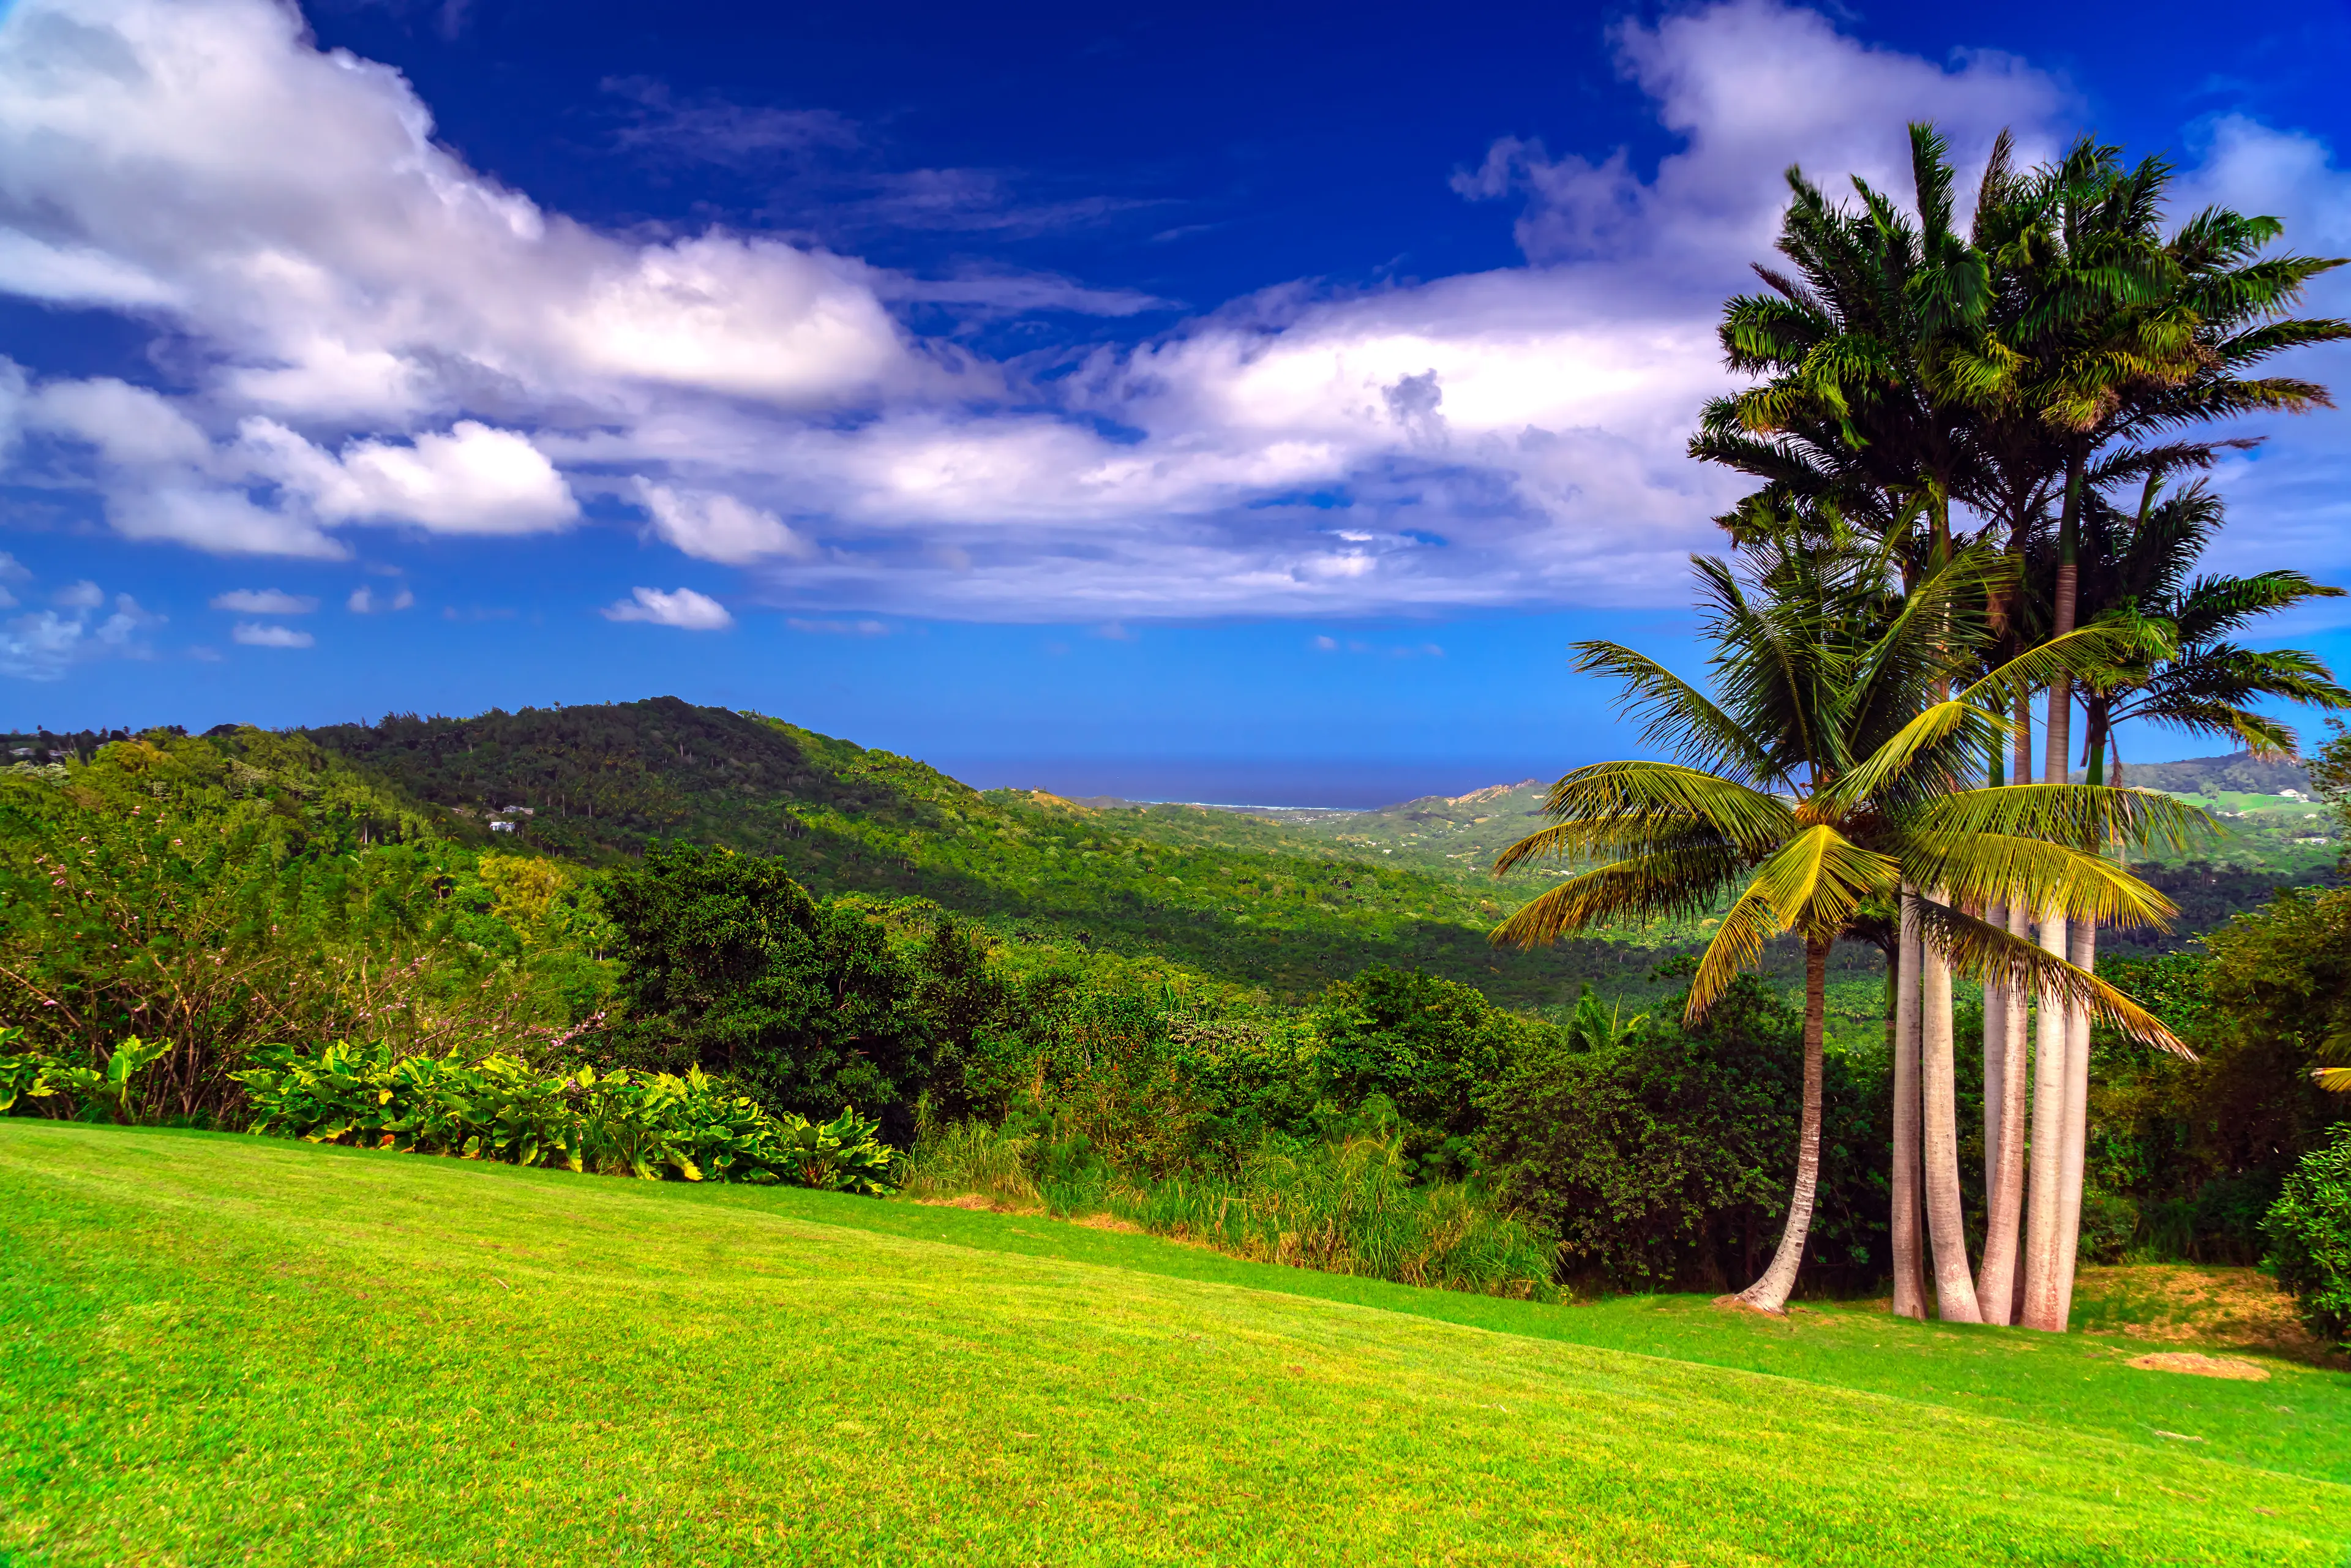 Green scenery with palm trees